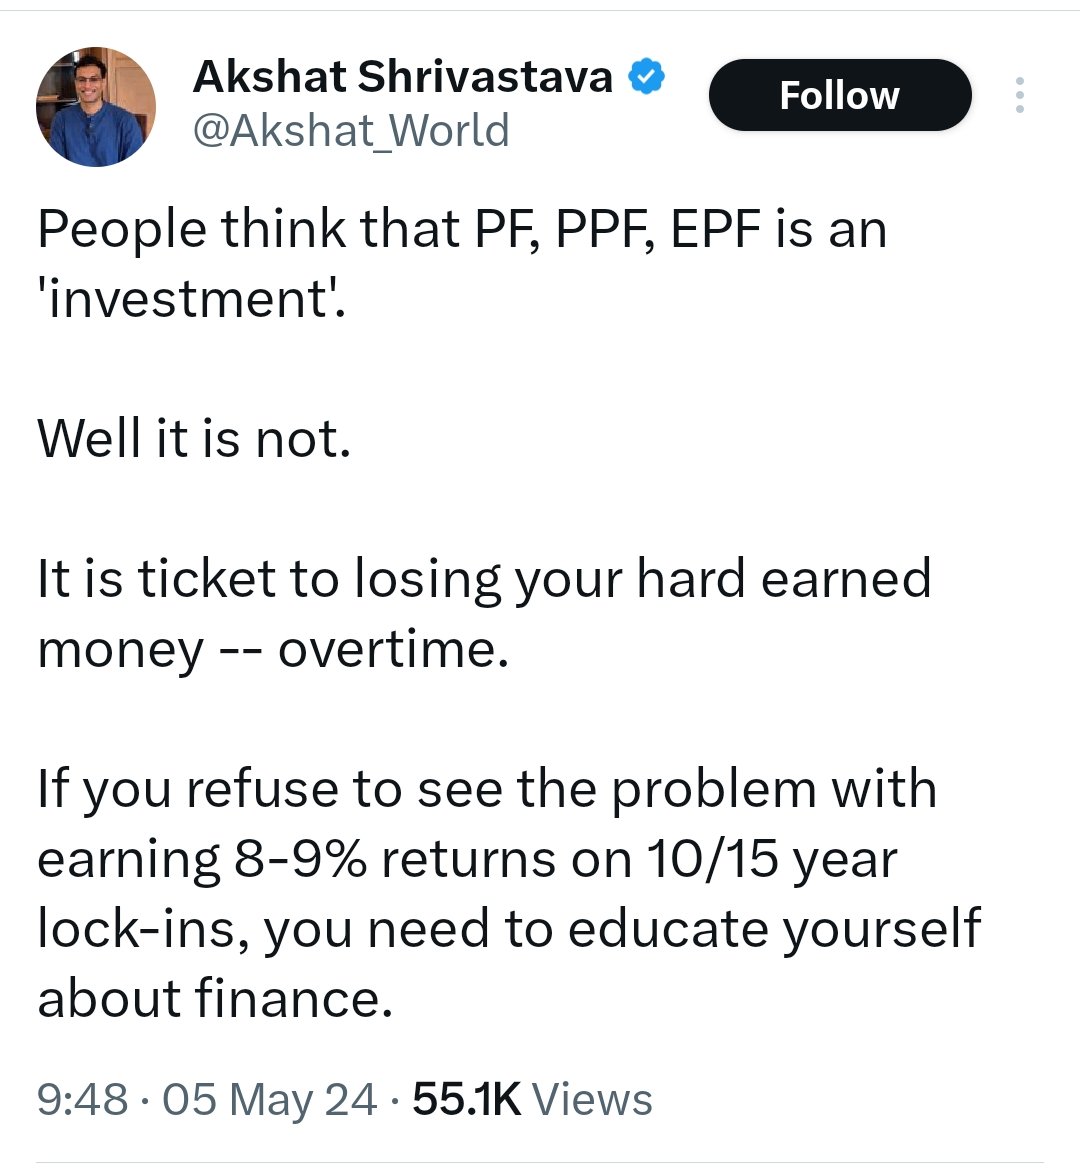 Agreed. Don't lose your hard earned money slowly in PF, EPF, PPF

Get educated in finance and lose money fast in Vauld's crypto FD & Lakshmi NFT 👍